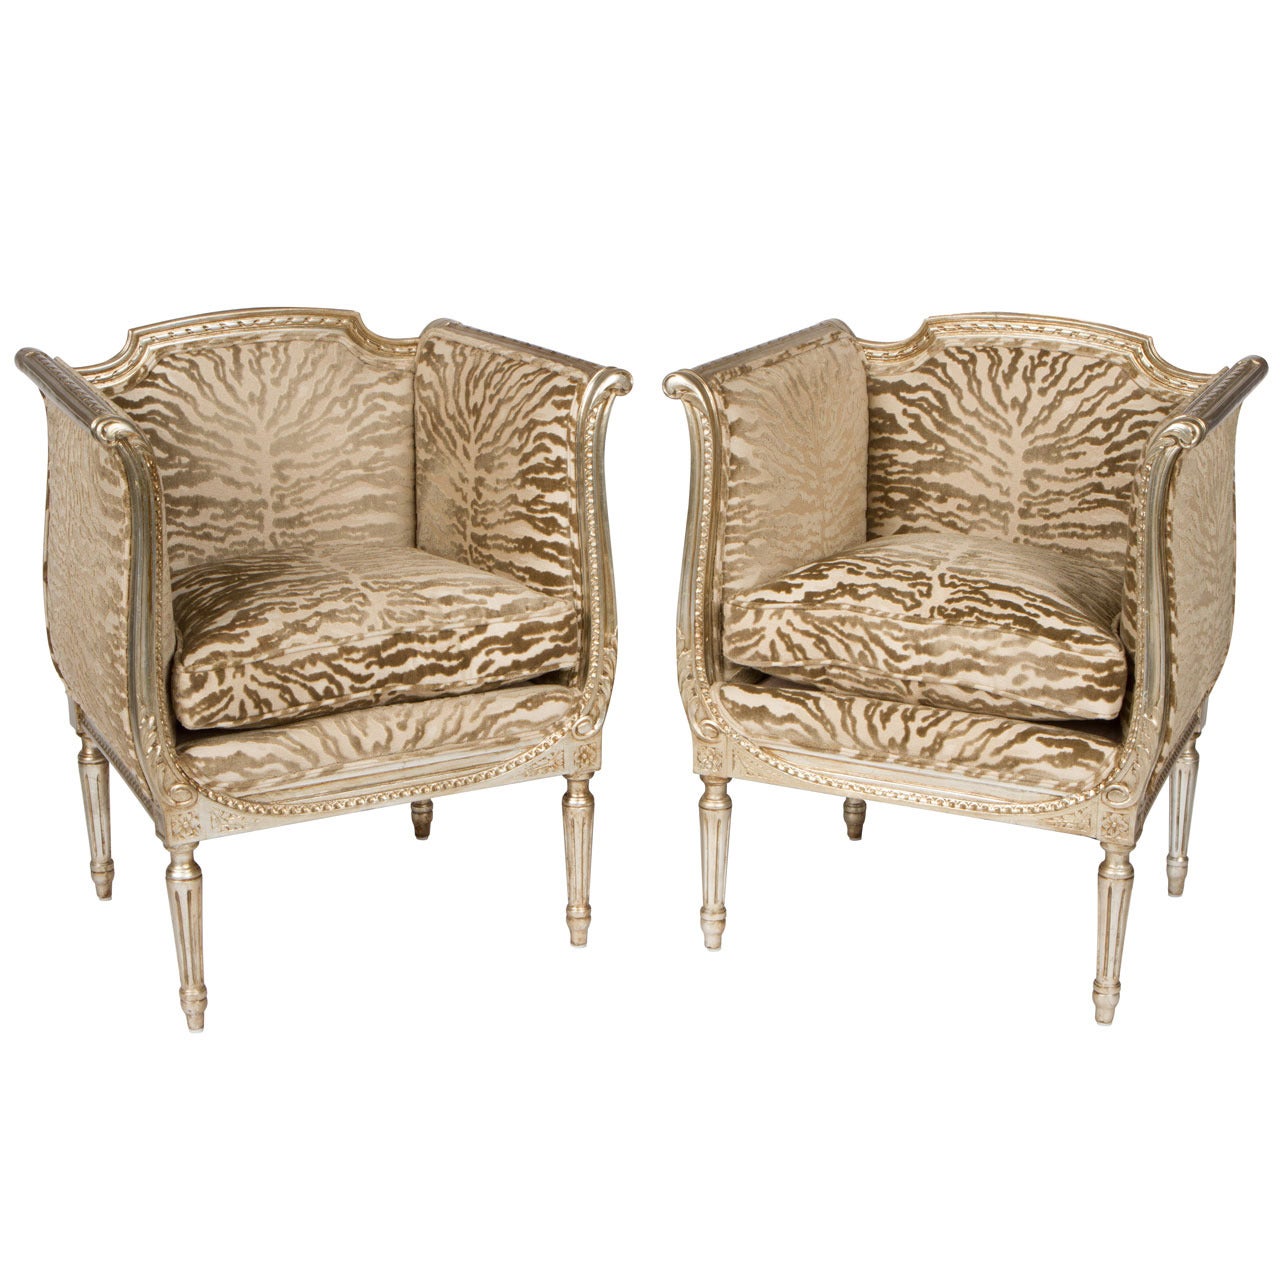 Pair of French Louis XVI Style Chairs